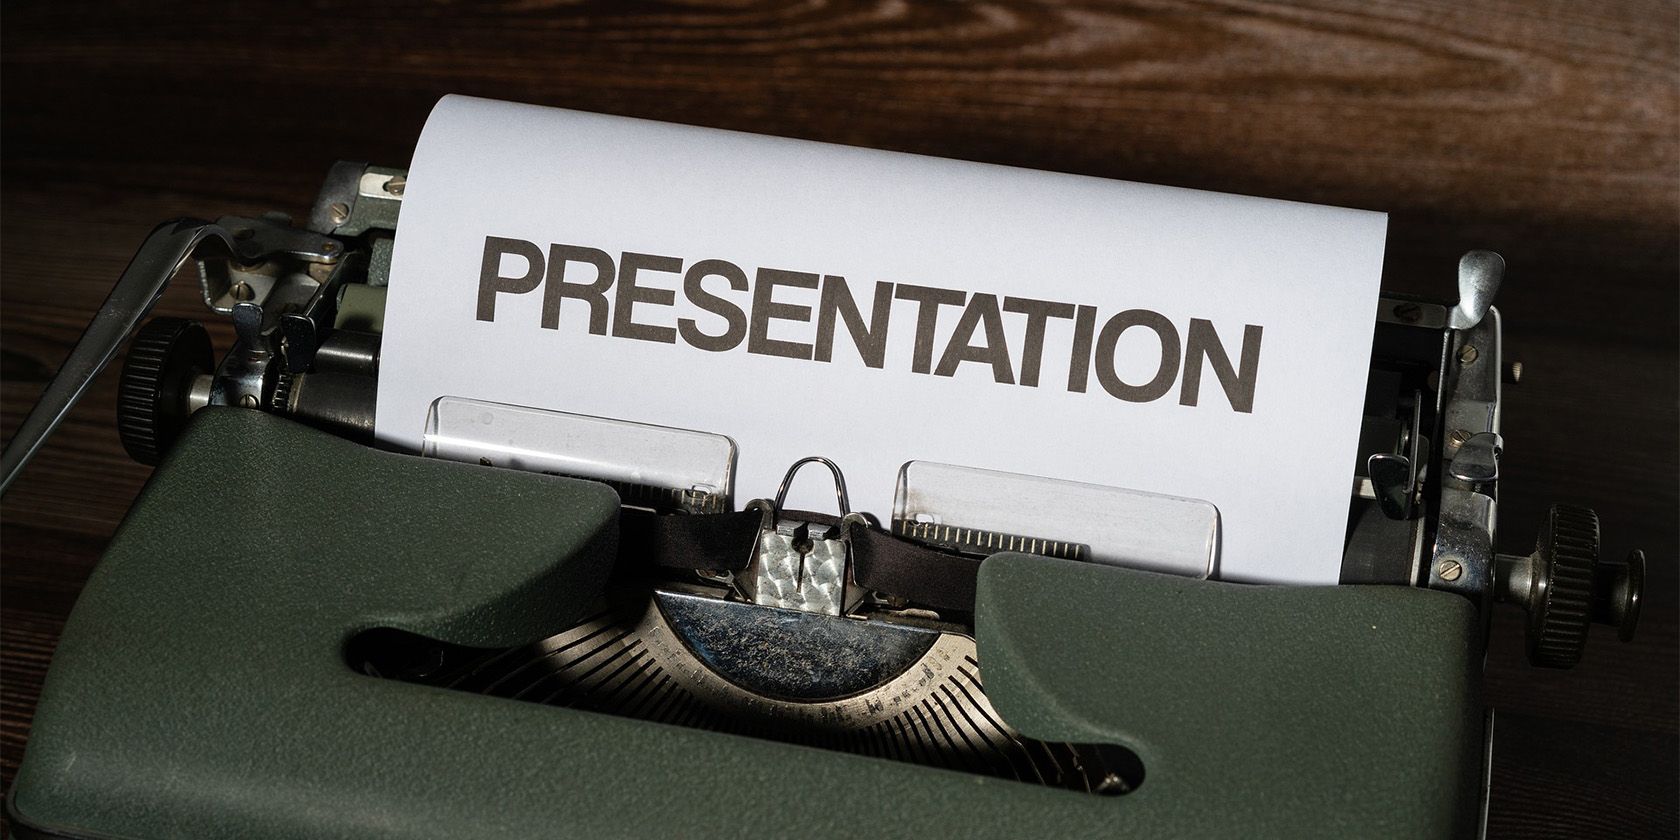 Paper with Presentation printed on it.